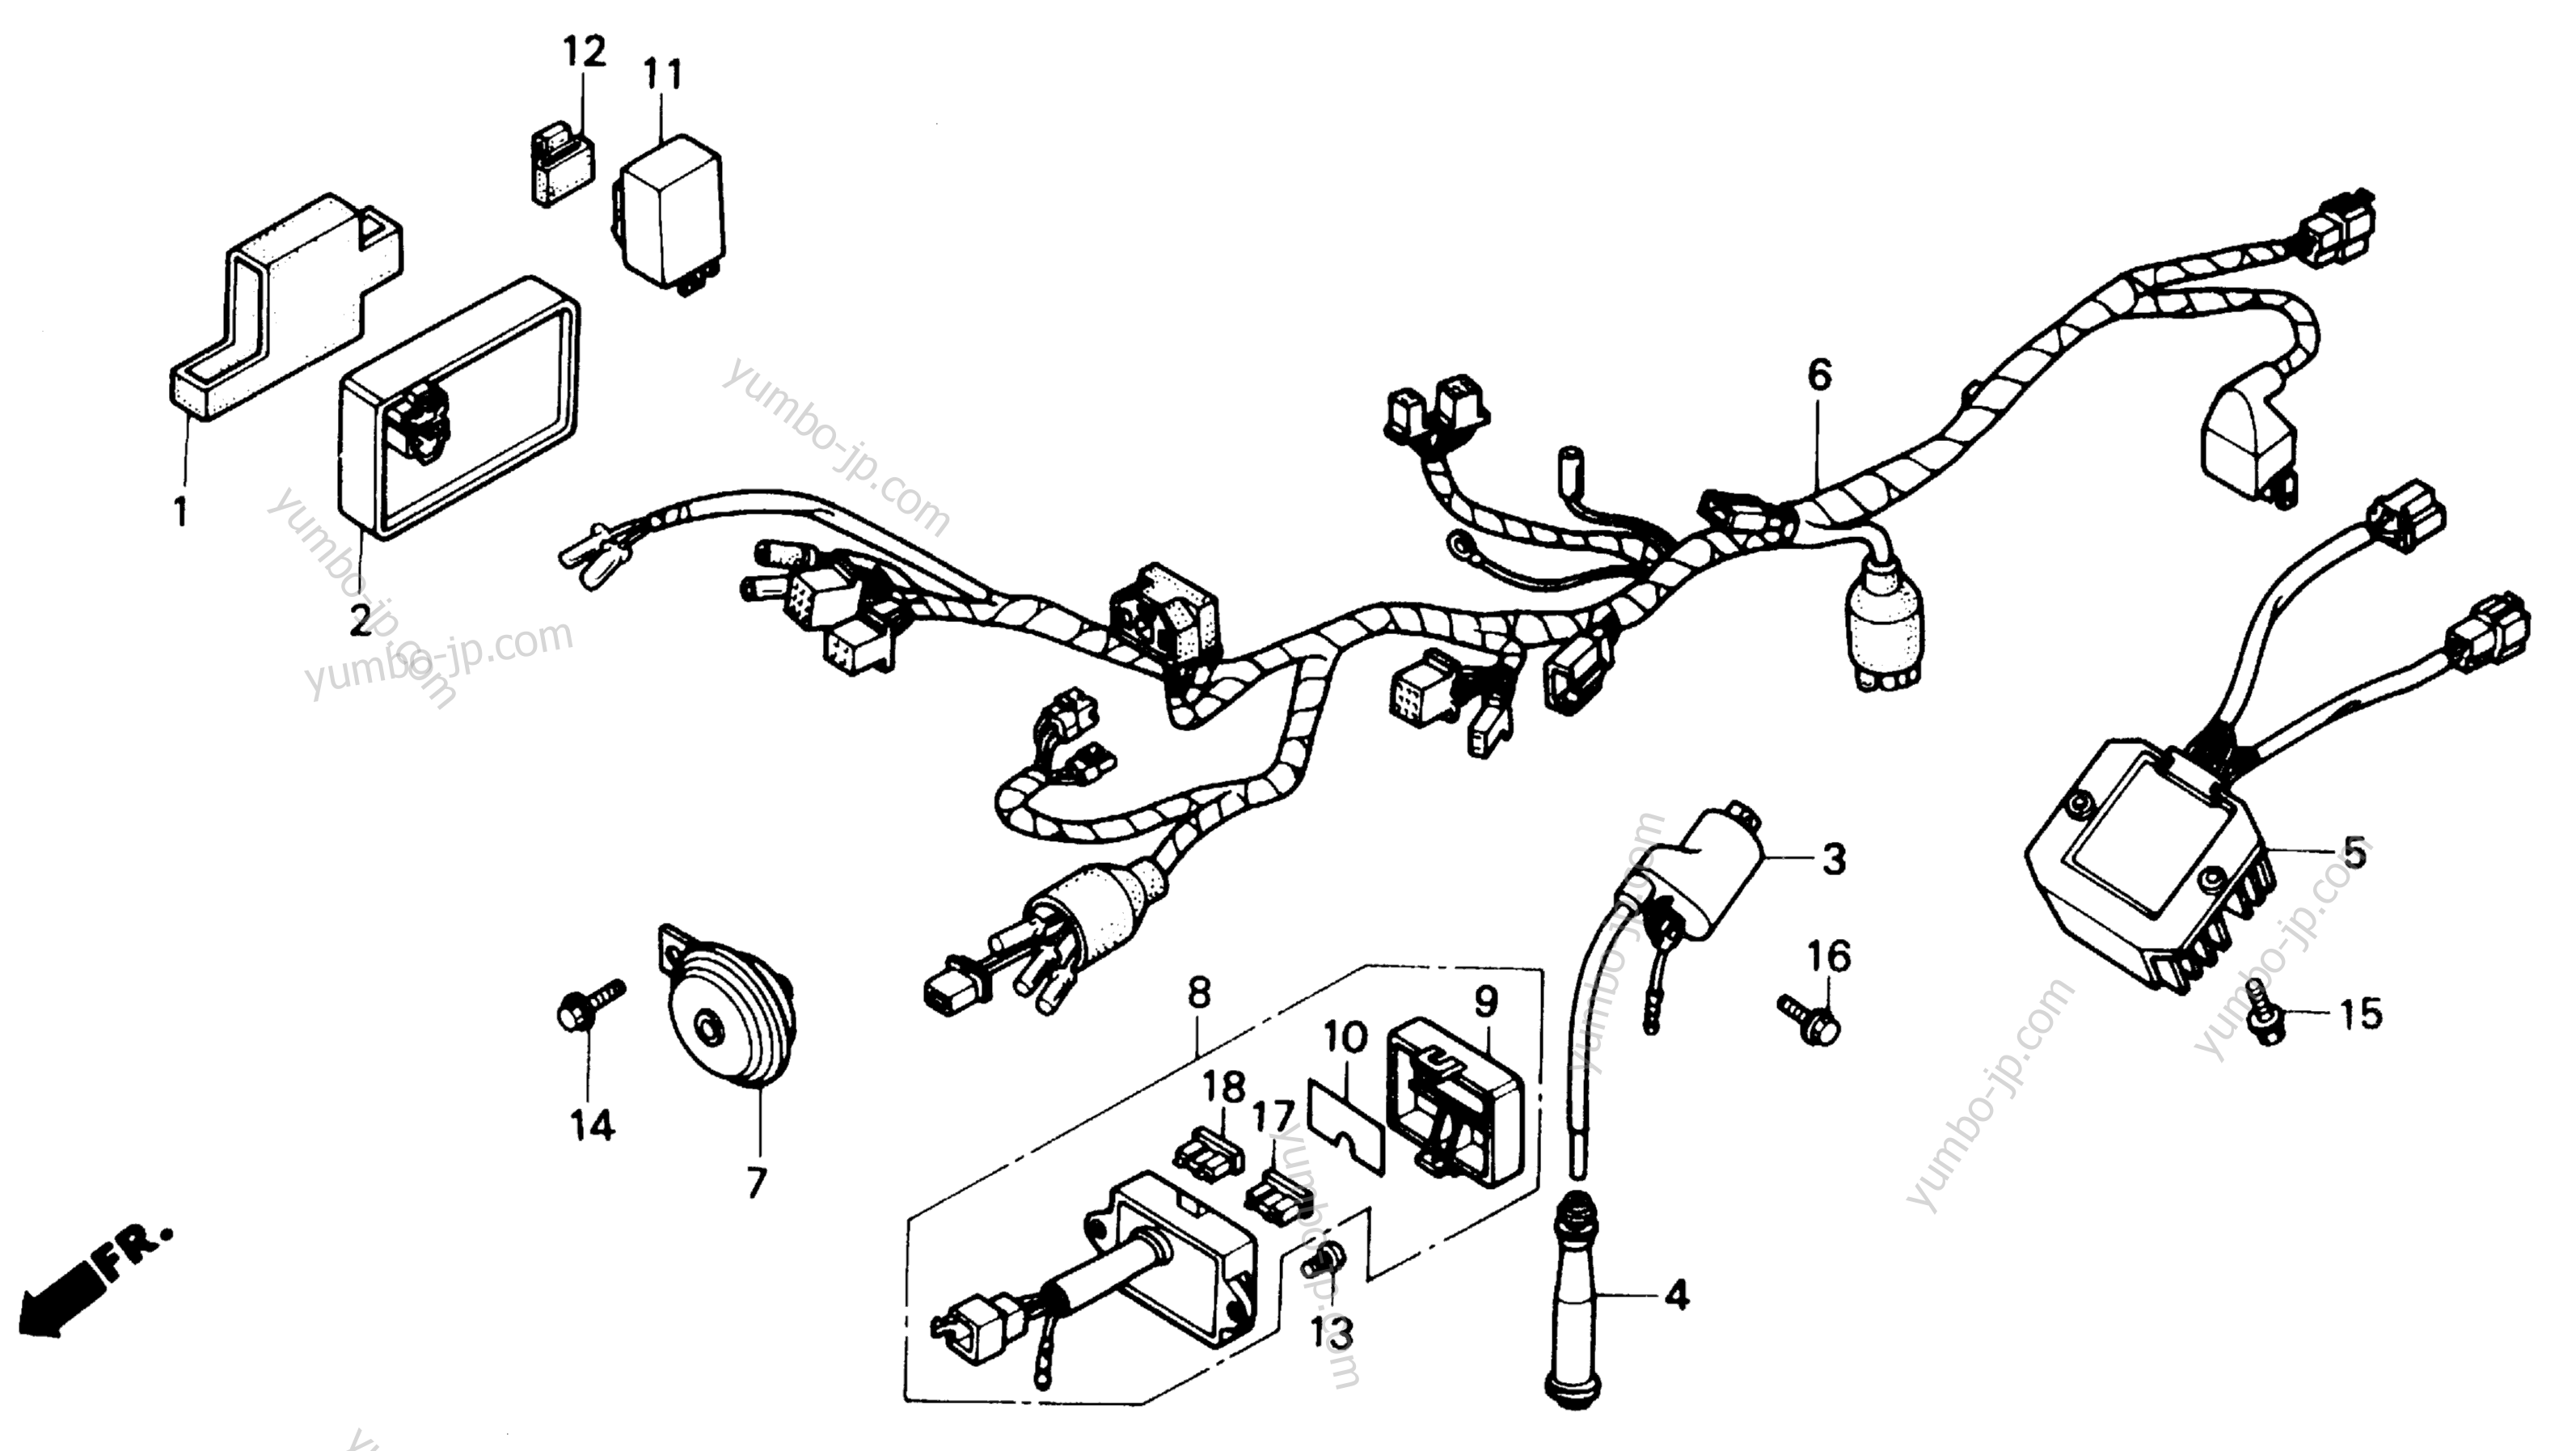 WIRE HARNESS for motorcycles HONDA NX650 A 1988 year